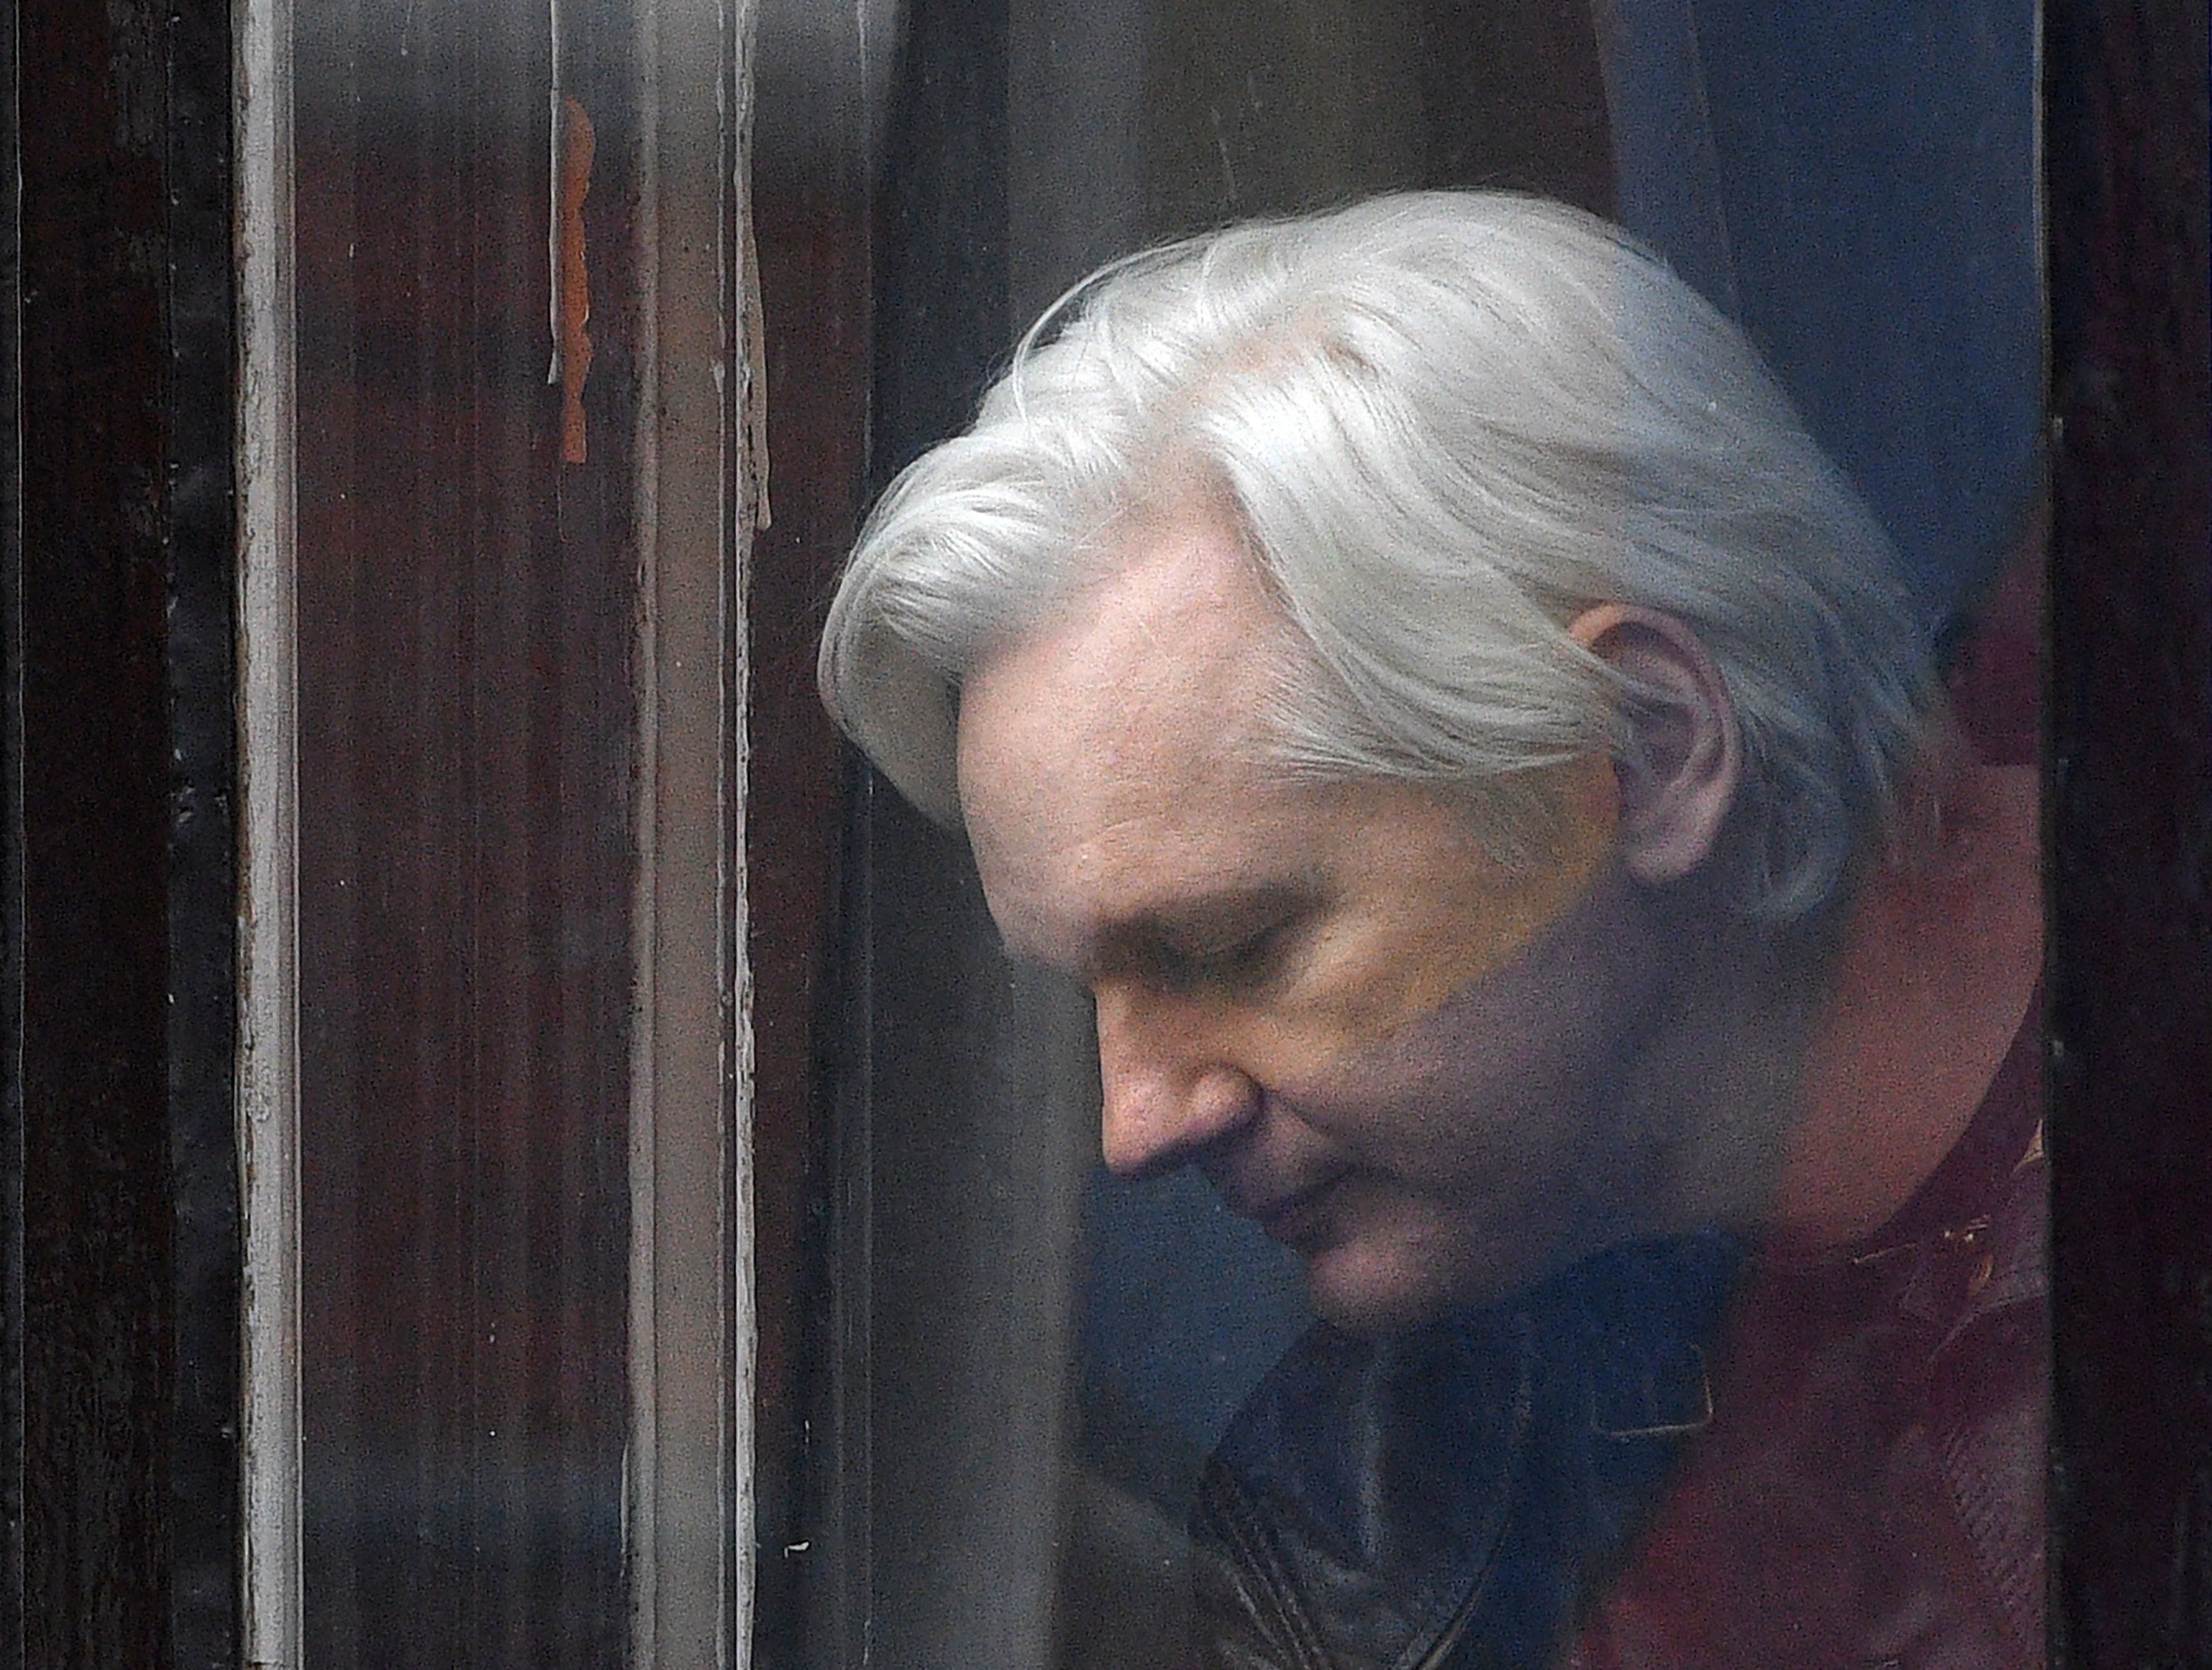 Lawyers for Julian Assange are making one last attempt to block his extradition to the US. Photo: EPA-EFE